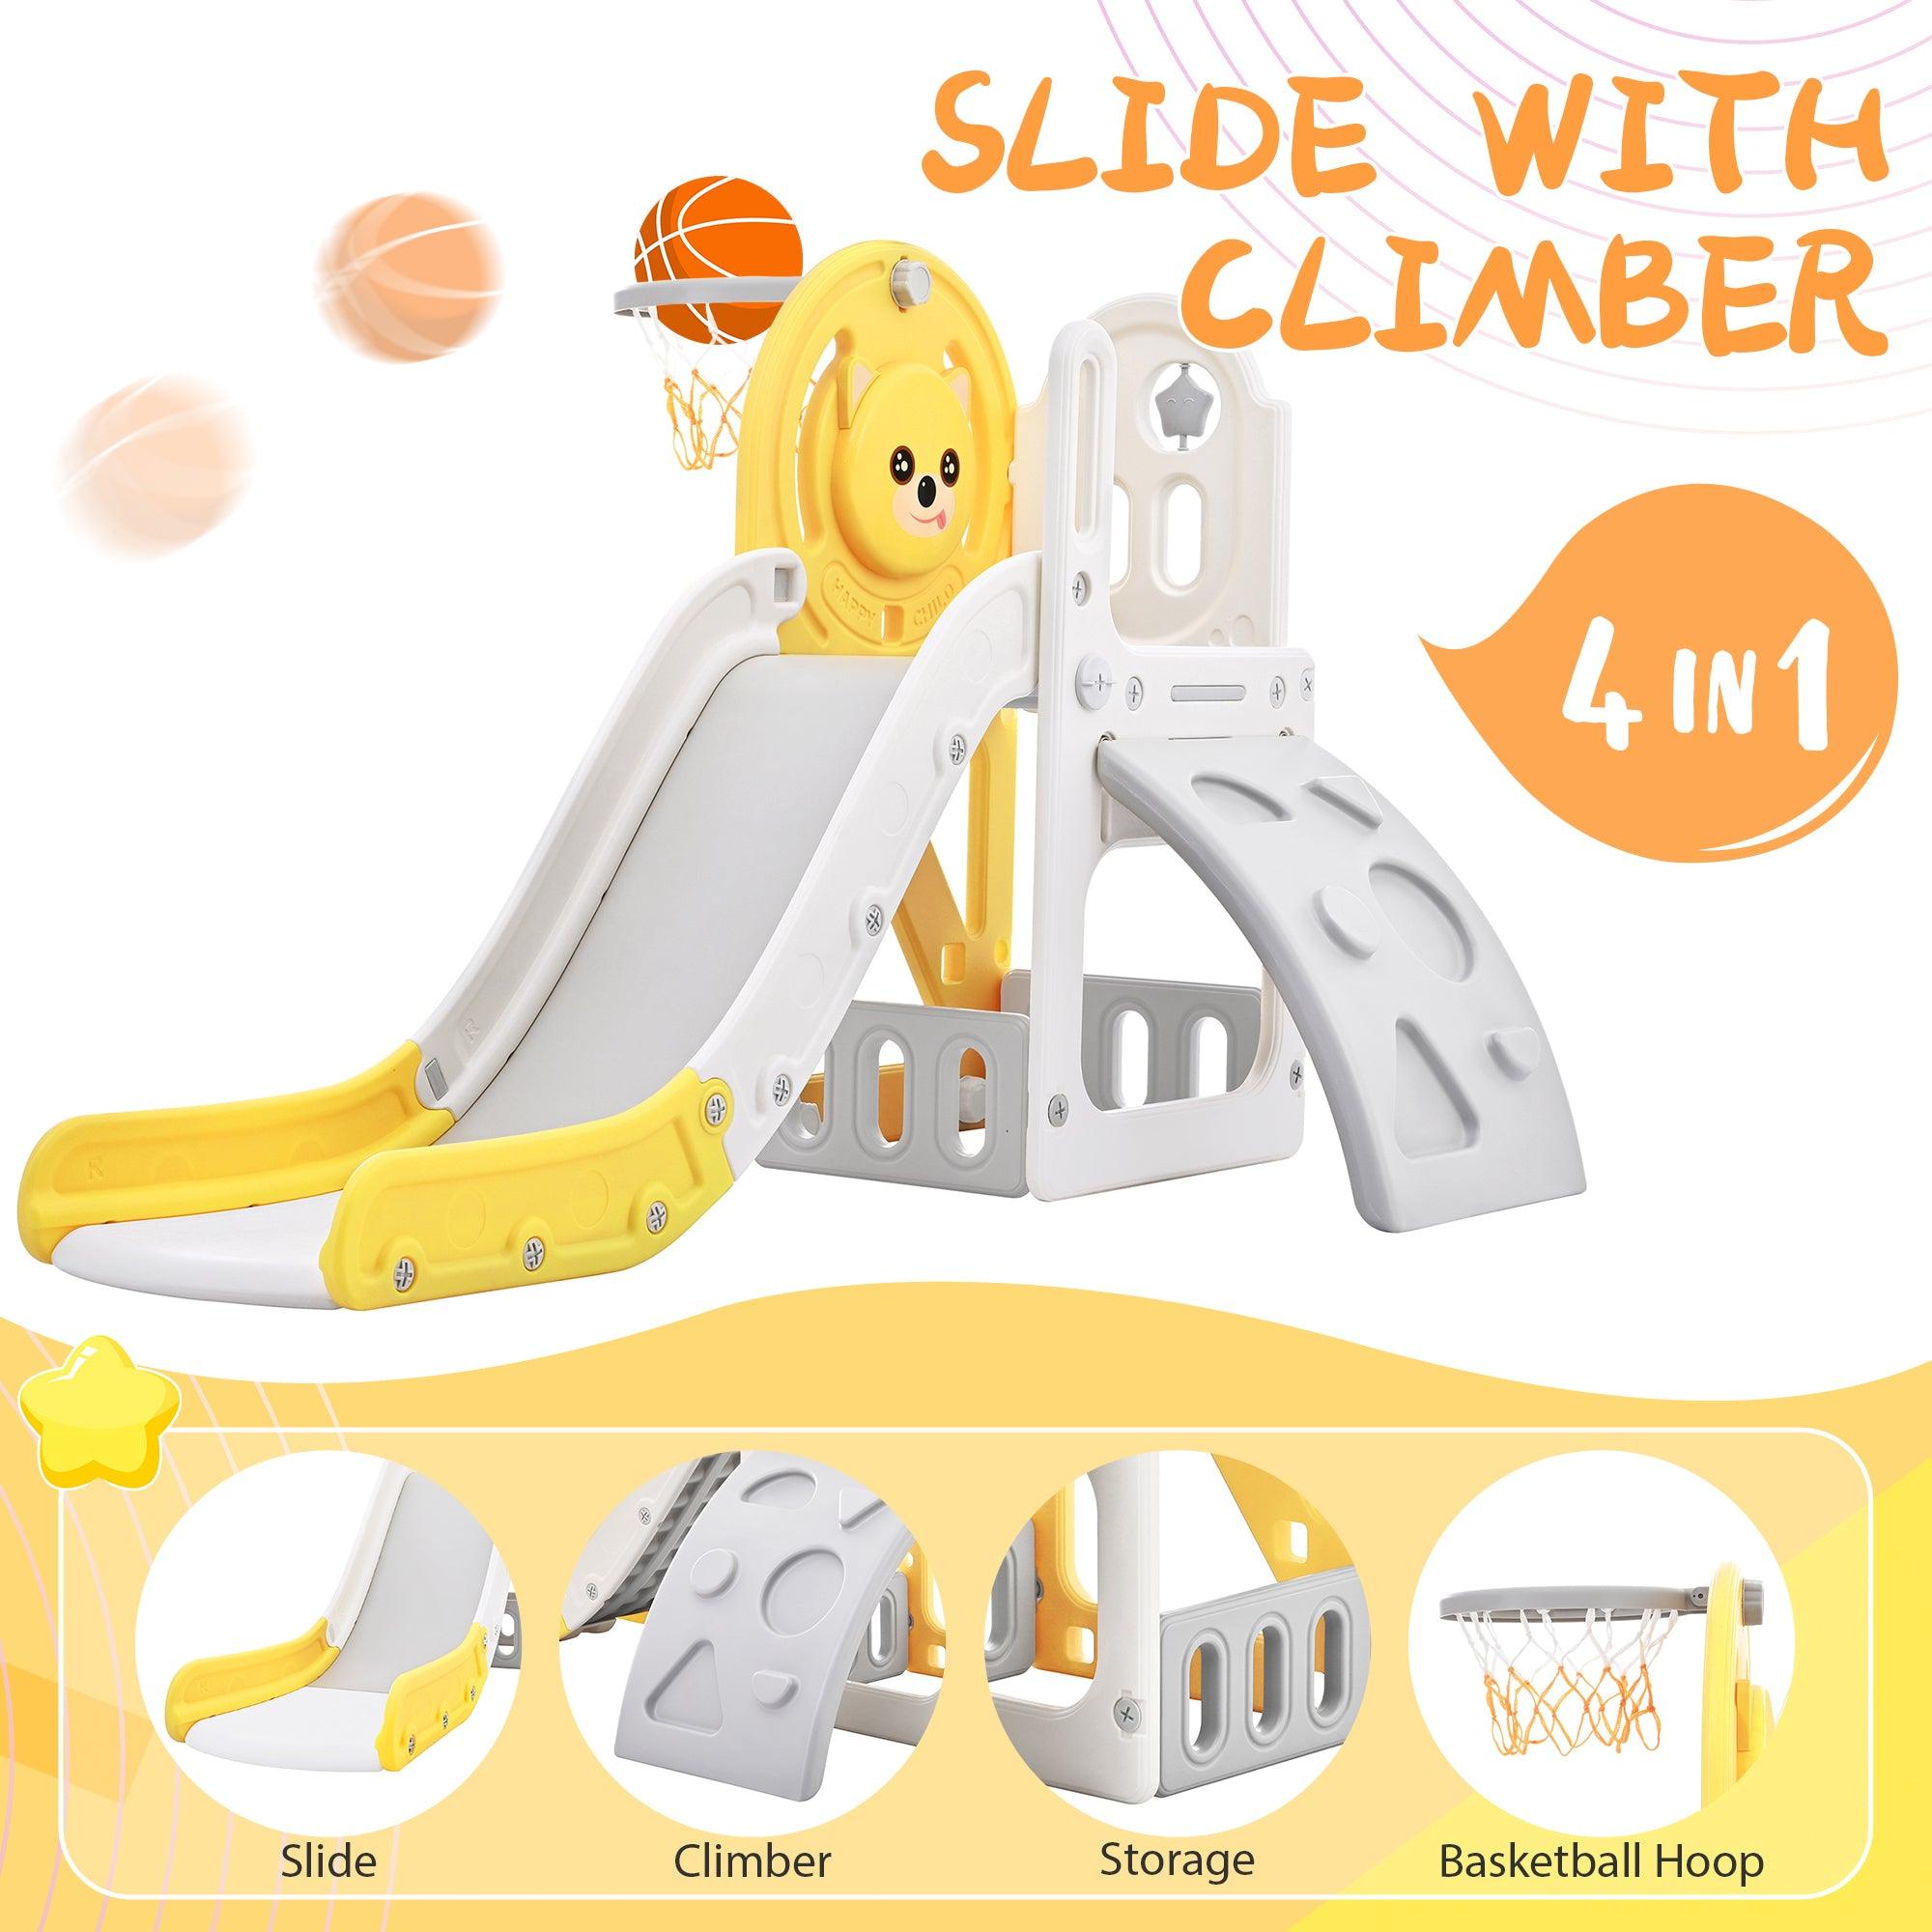 🆓🚛 Toddler Climber & Slide Set 4 in 1, Kids Playground Climber Freestanding Slide Playset With Basketball Hoop Play Combination for Babies Indoor & Outdoor, Yellow & Gray